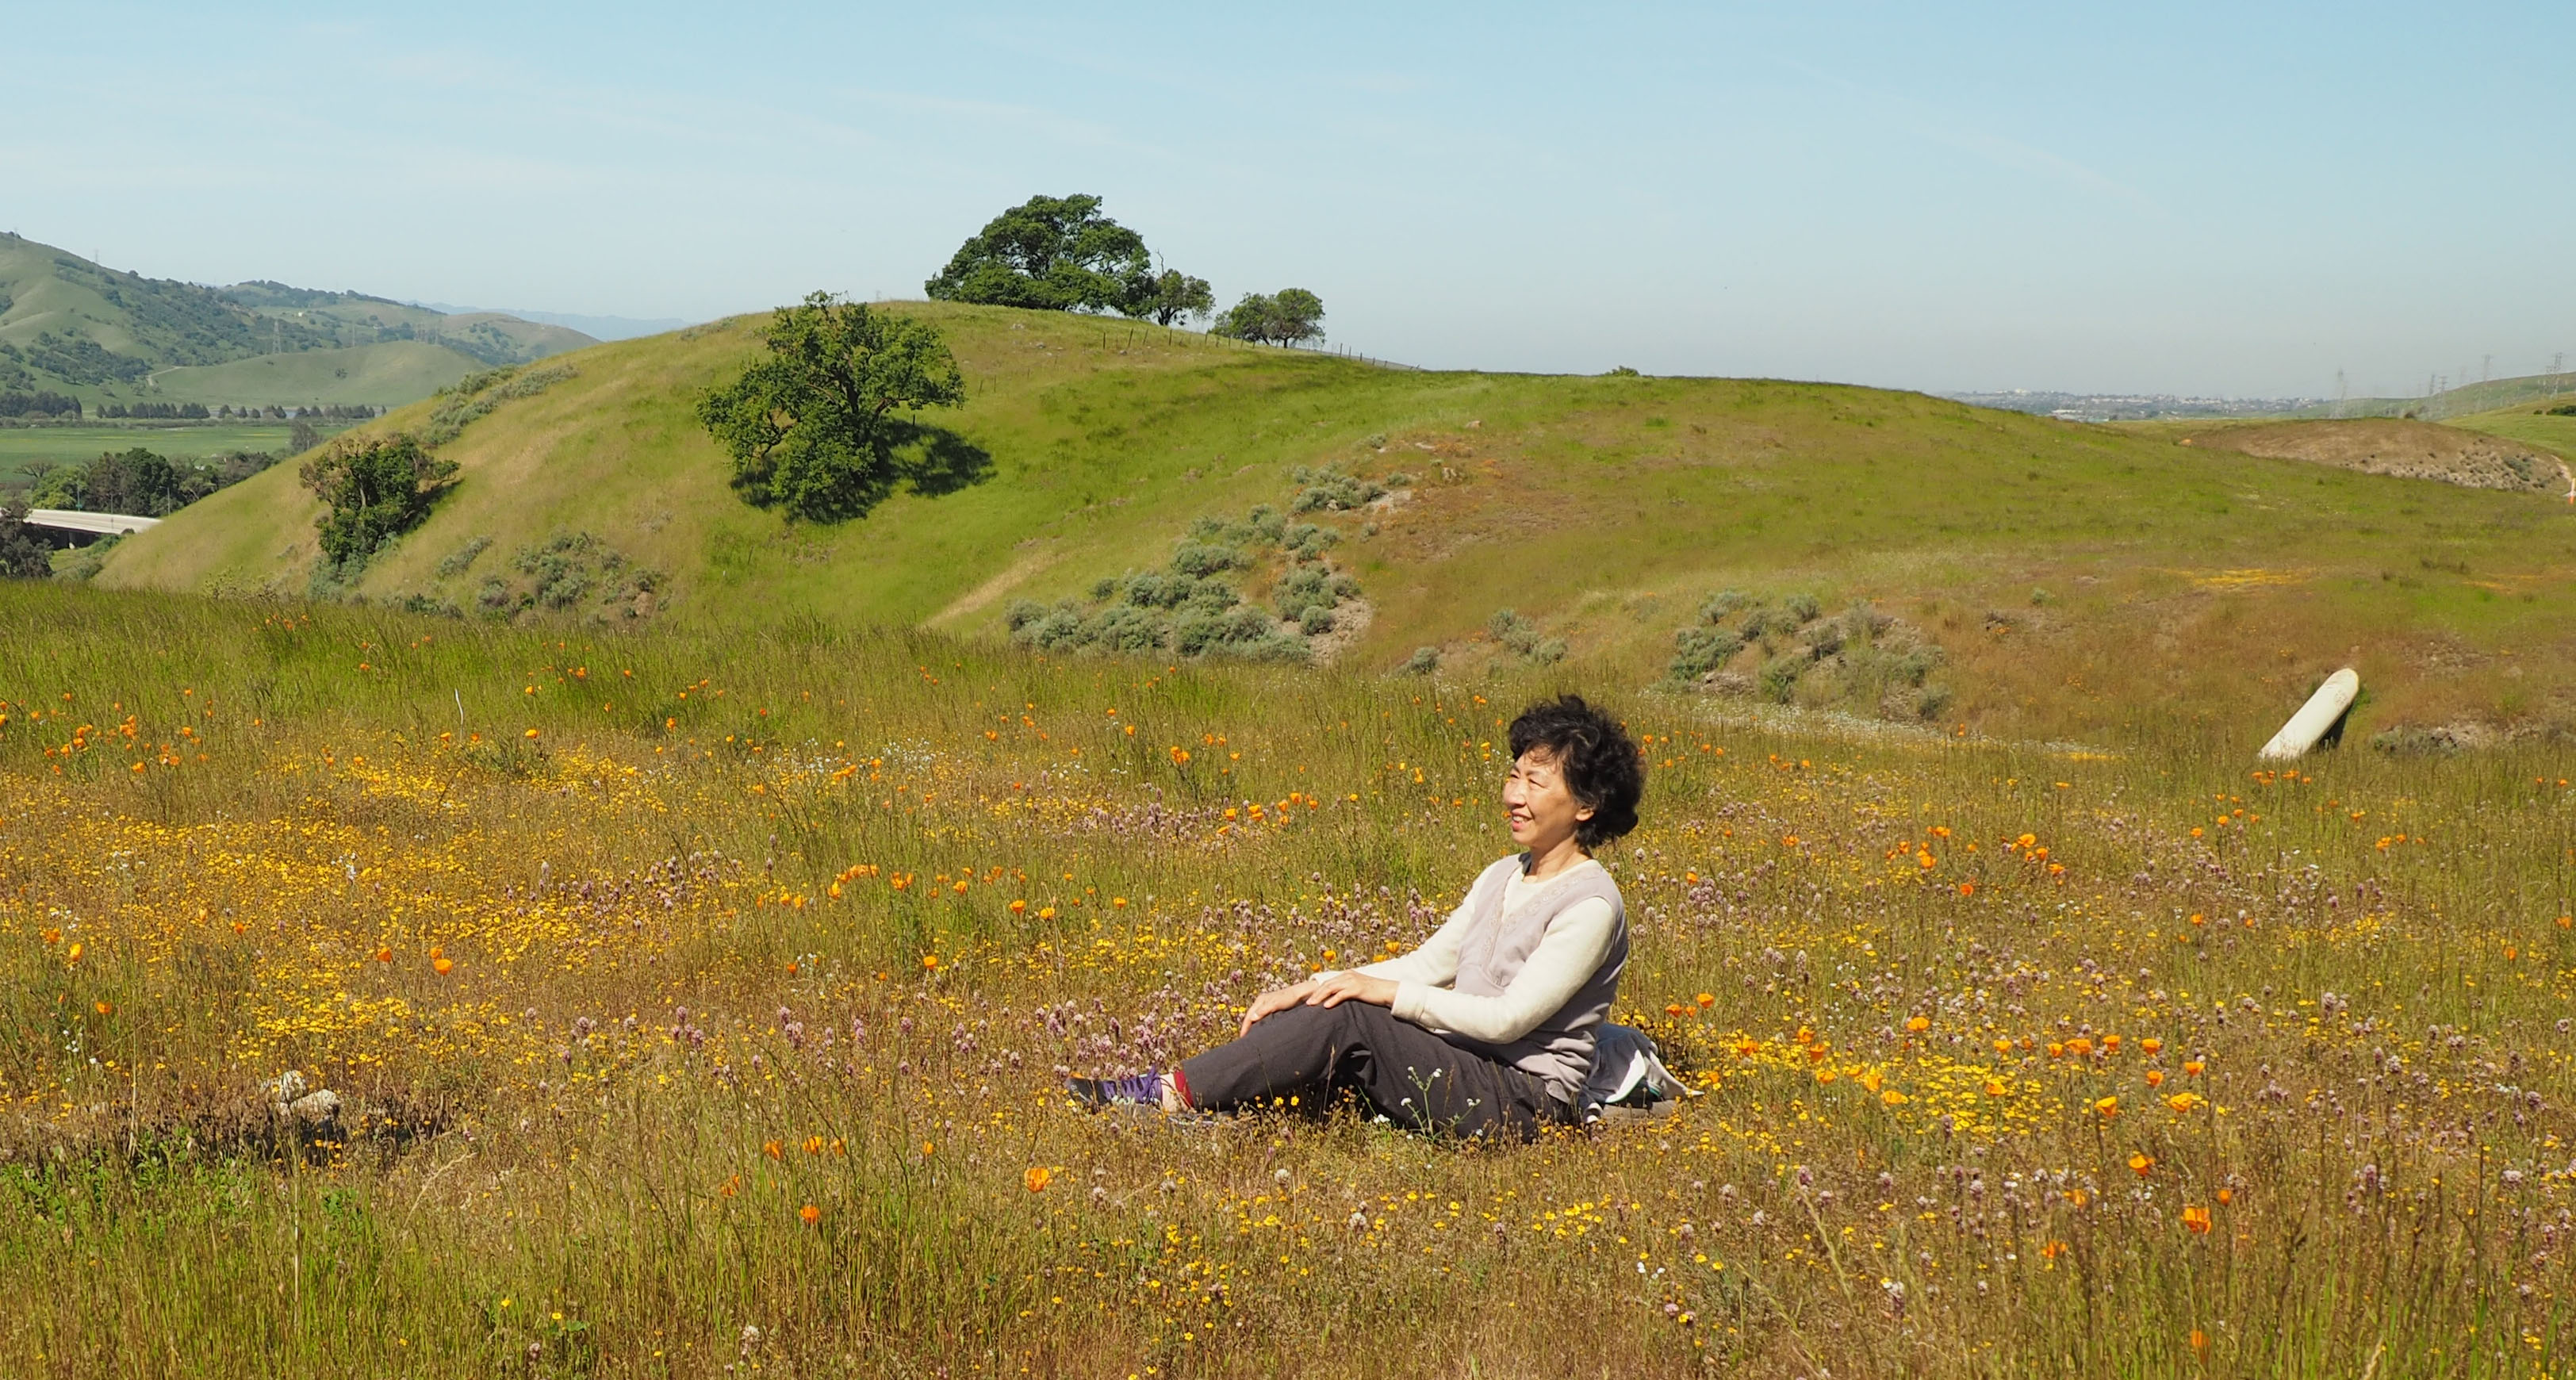 Smiling woman sitting in field of wildflowers, green hills in background